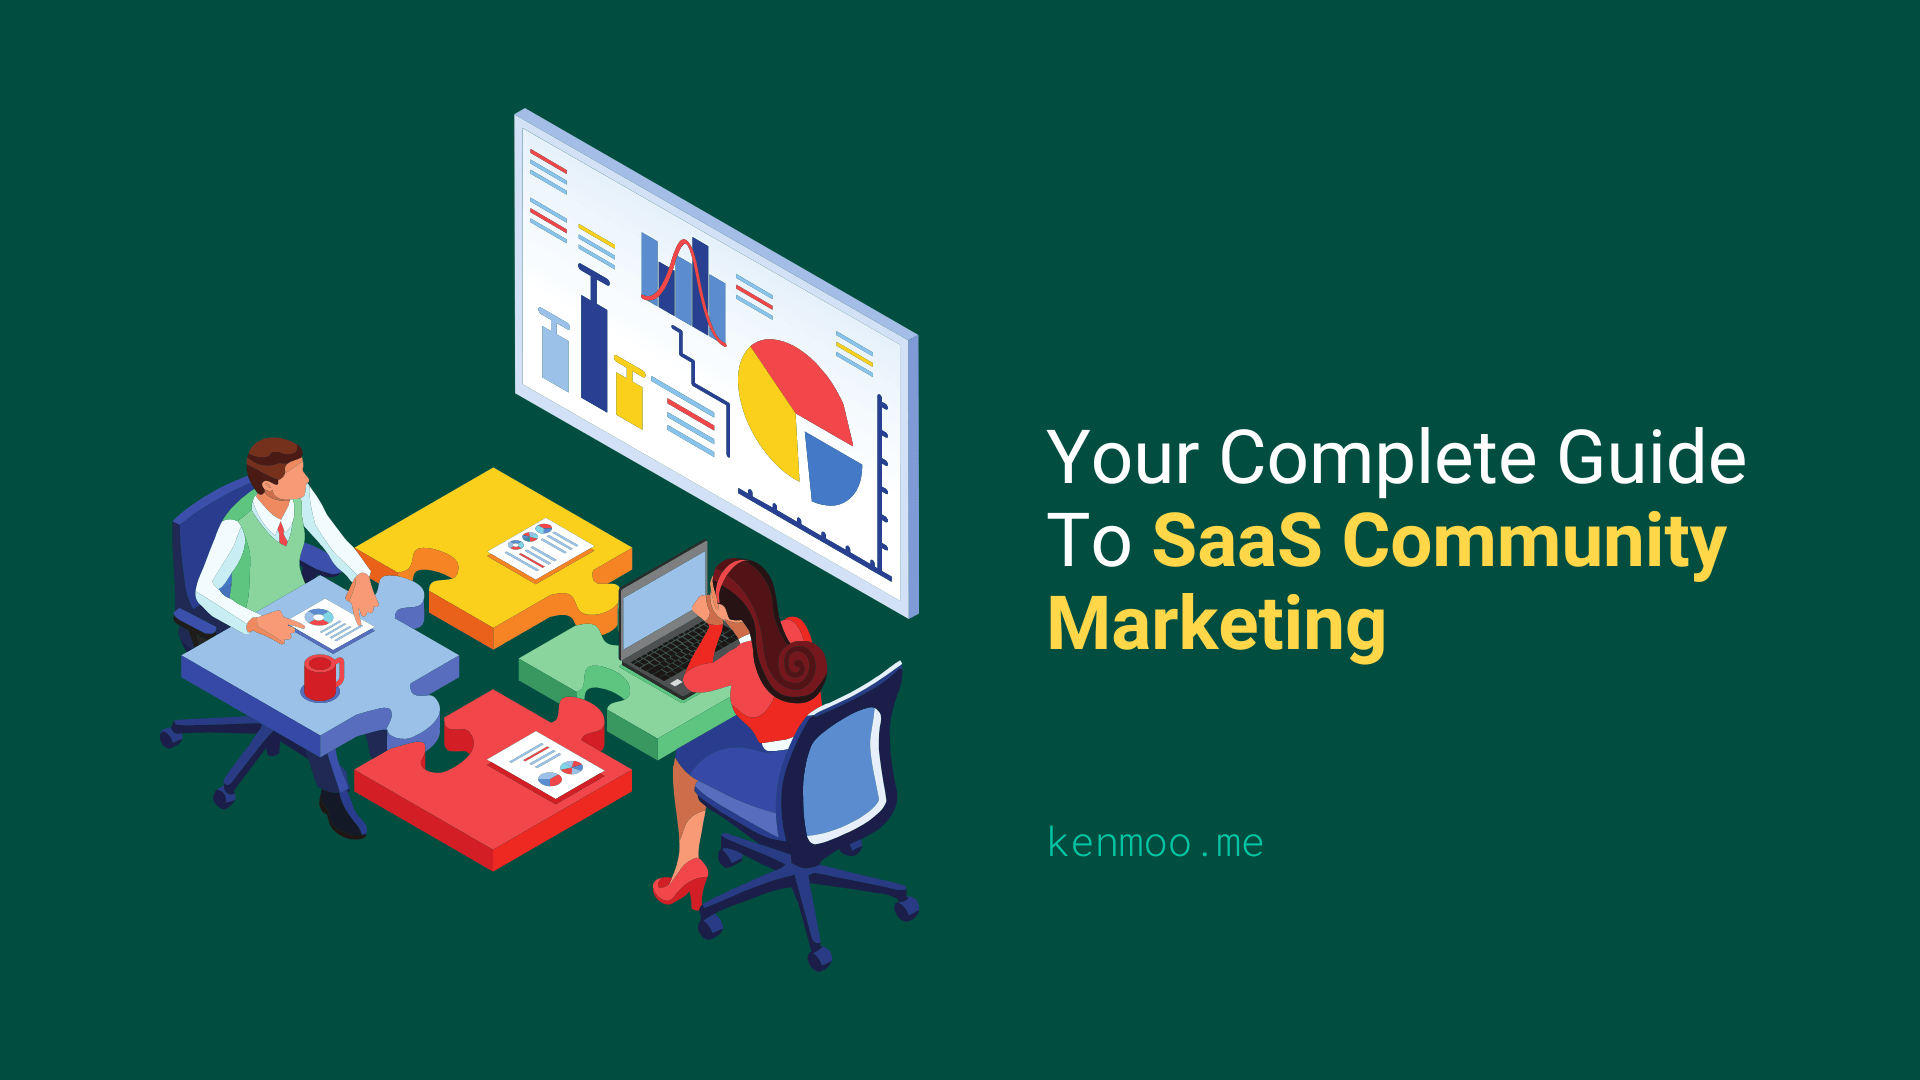 Your Complete Guide To SaaS Community Marketing